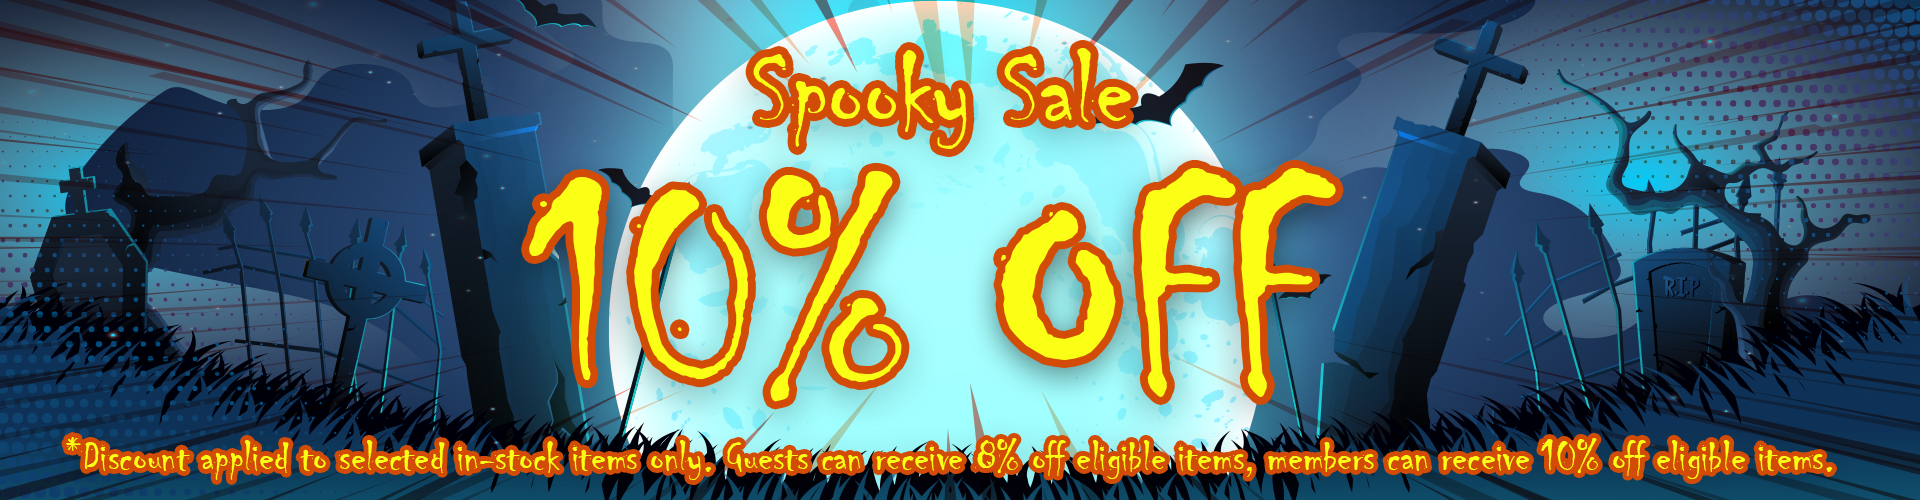 Wireless 1 Spooky sale extra up to 10% OFF on eligible items with coupons